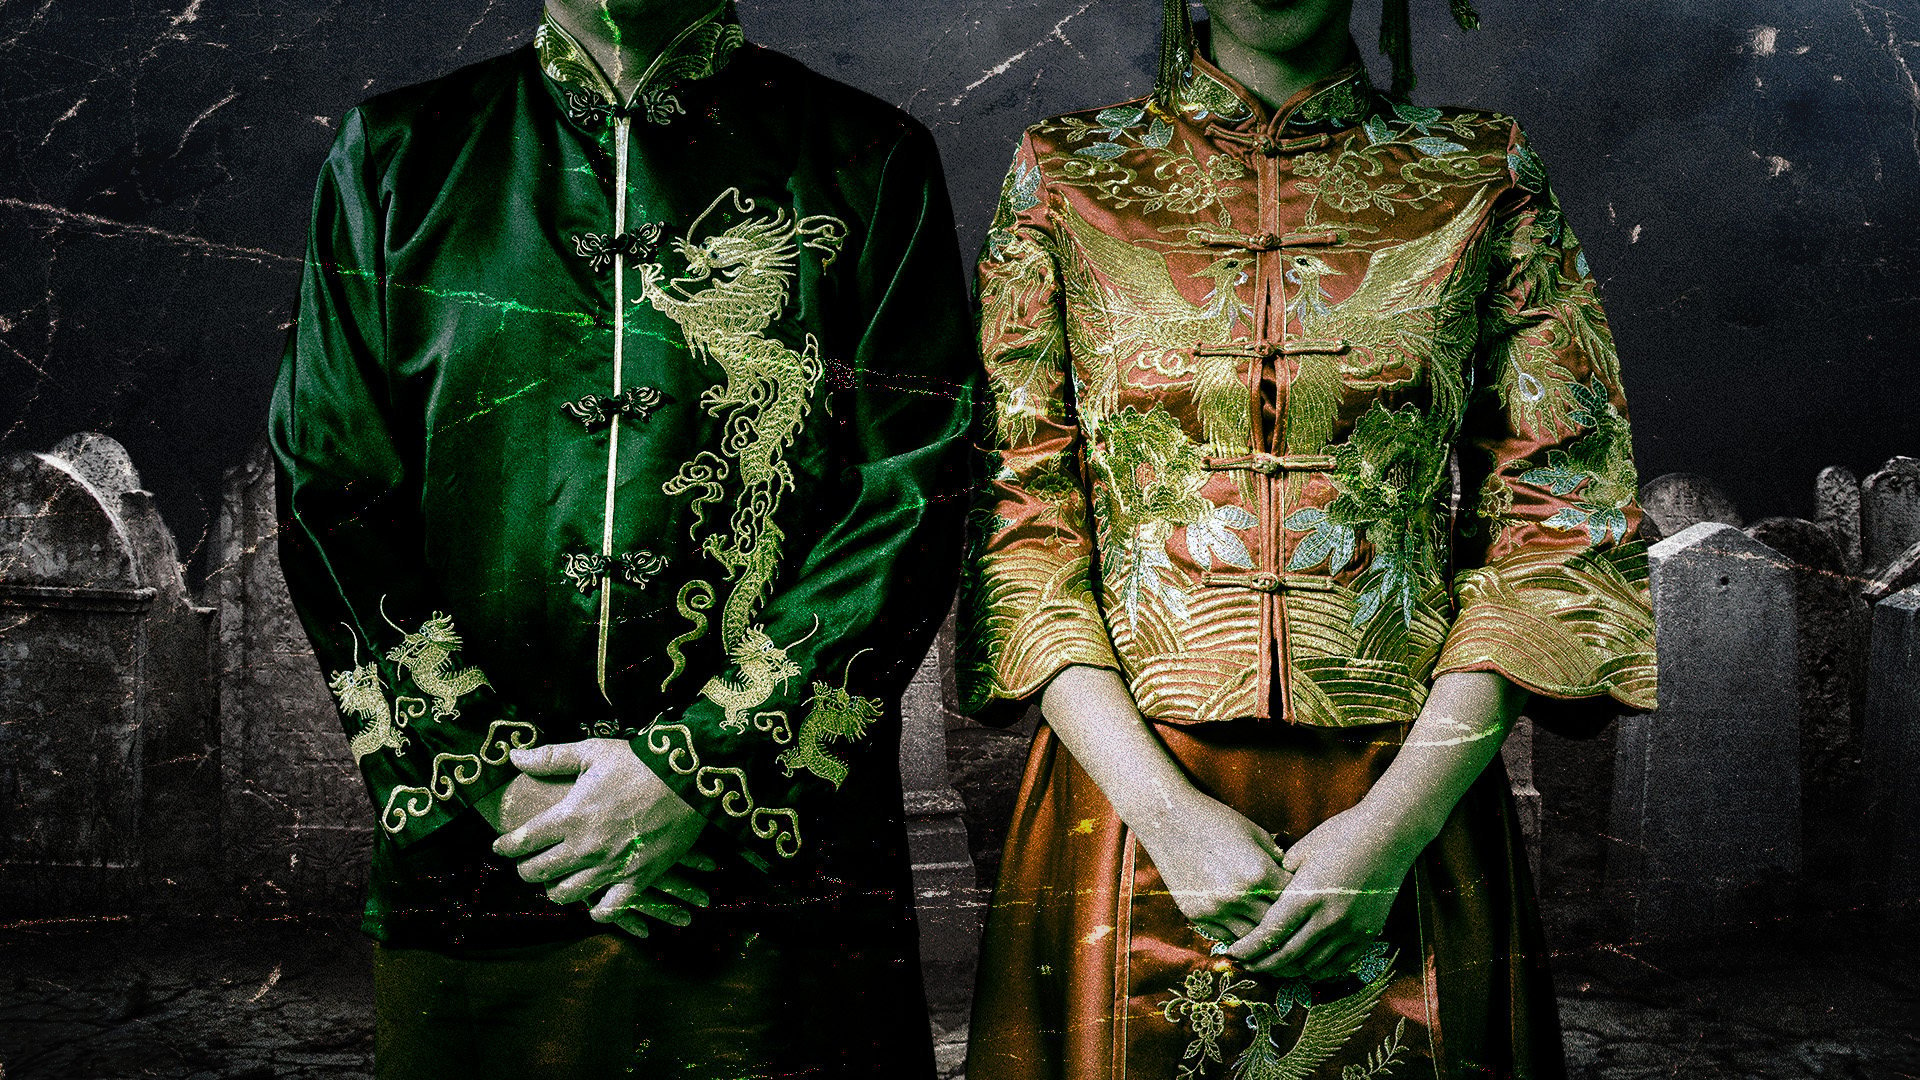 The Post takes a deep dive into the complex, and sometimes sinister, world of China’s “ghost marriages” which see love continue in the afterlife. Photo: SCMP composite/Shutterstock